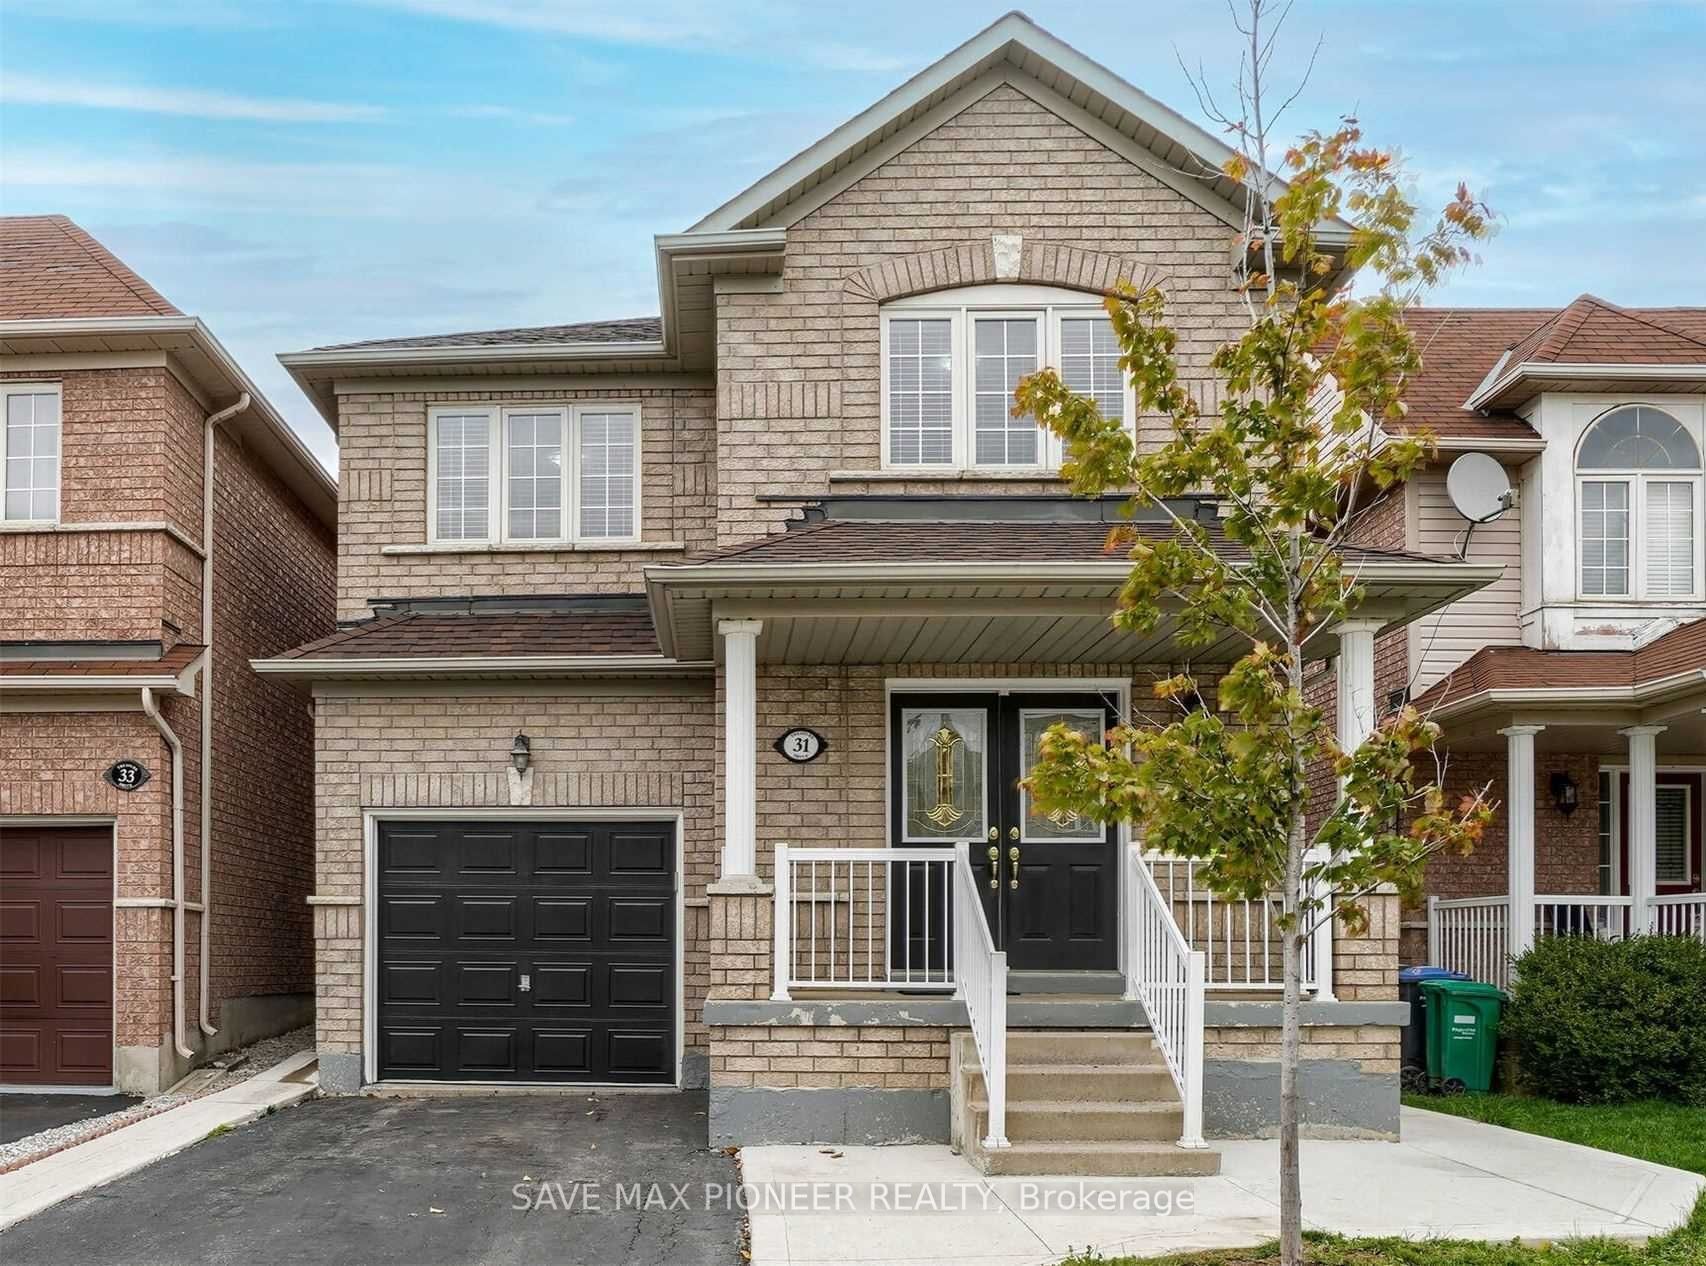 Detached house for sale at 31 Treasure Dr Brampton Ontario